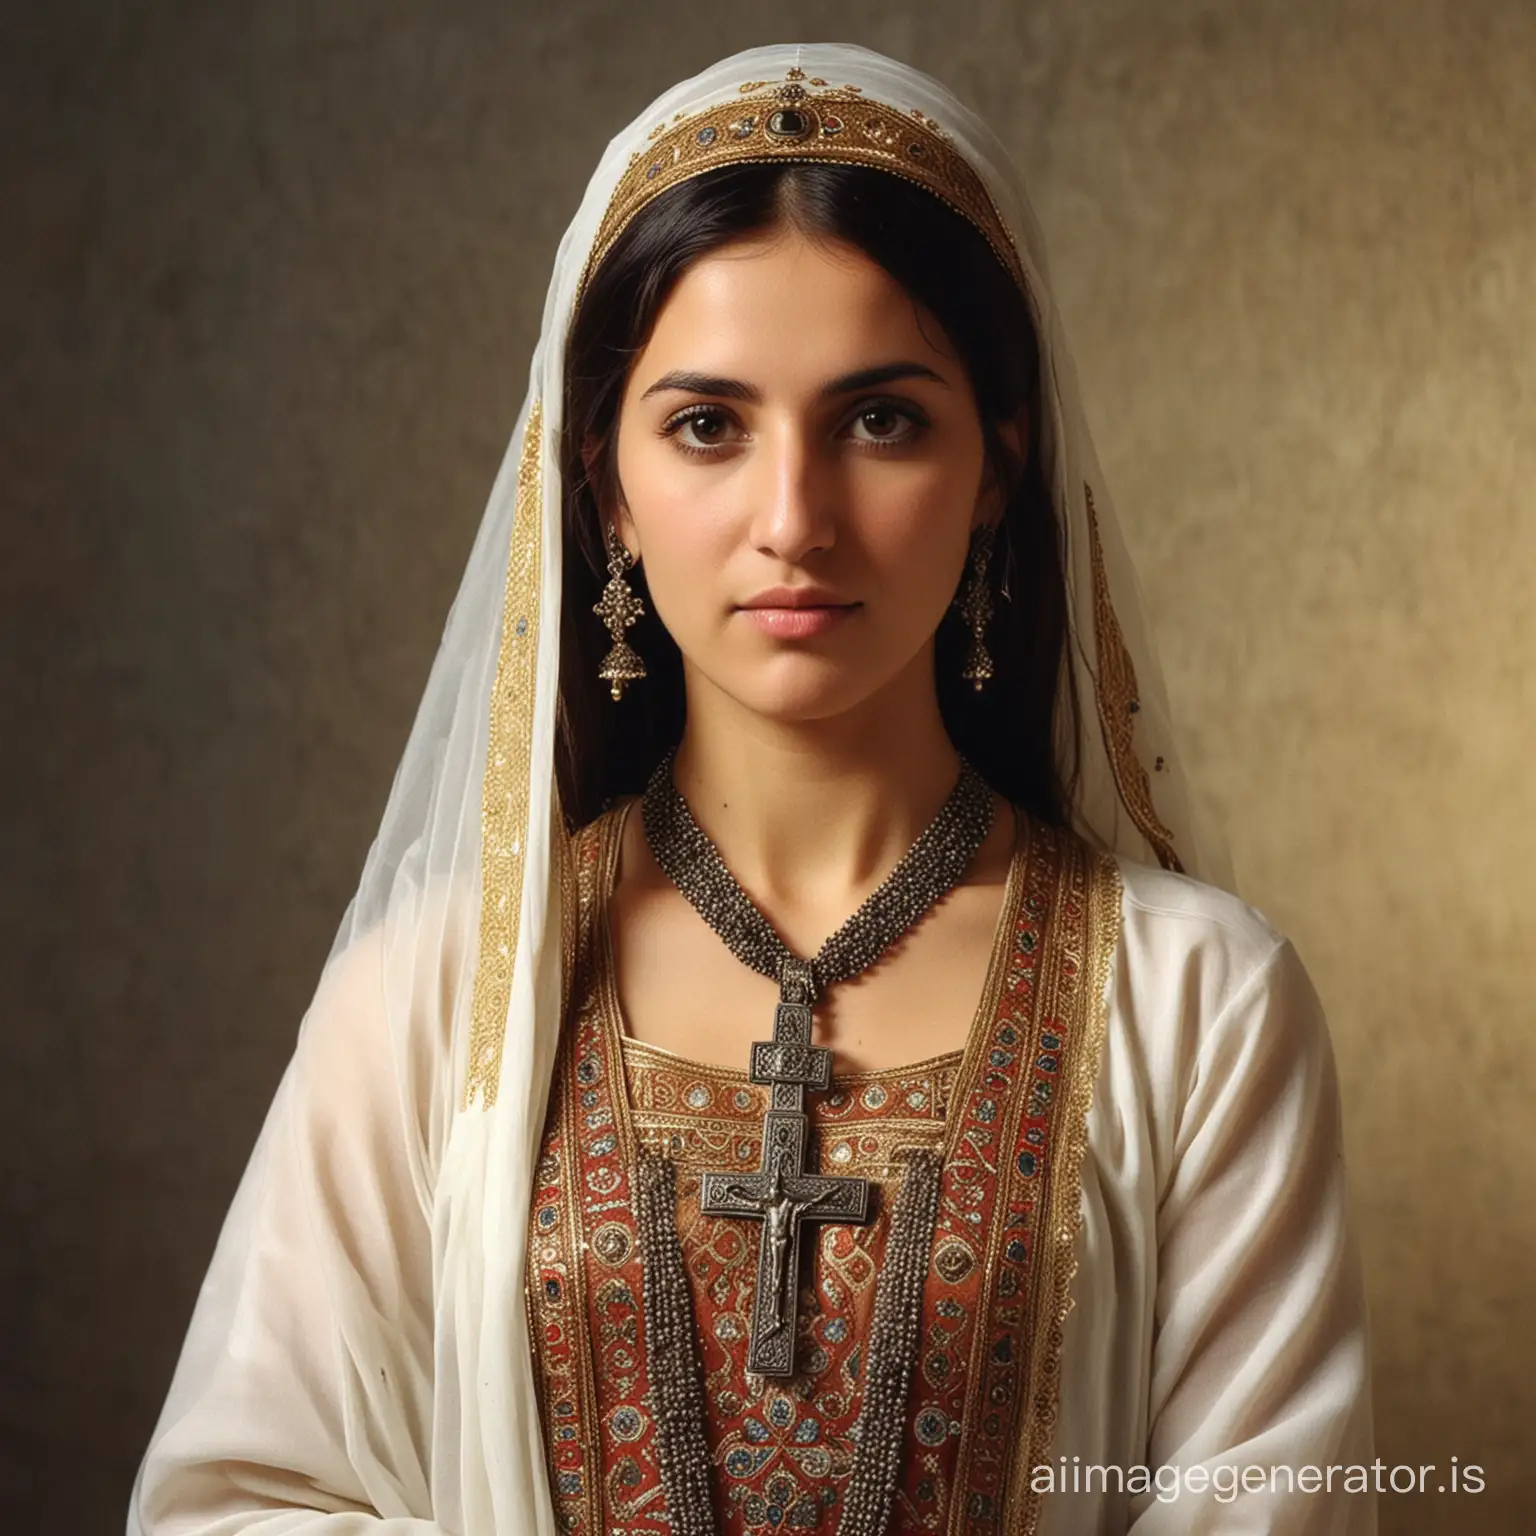 Katranide-Christian-Sponsor-of-Ani-Temple-9701025-Portrait-with-Cross-Necklace-and-Veil